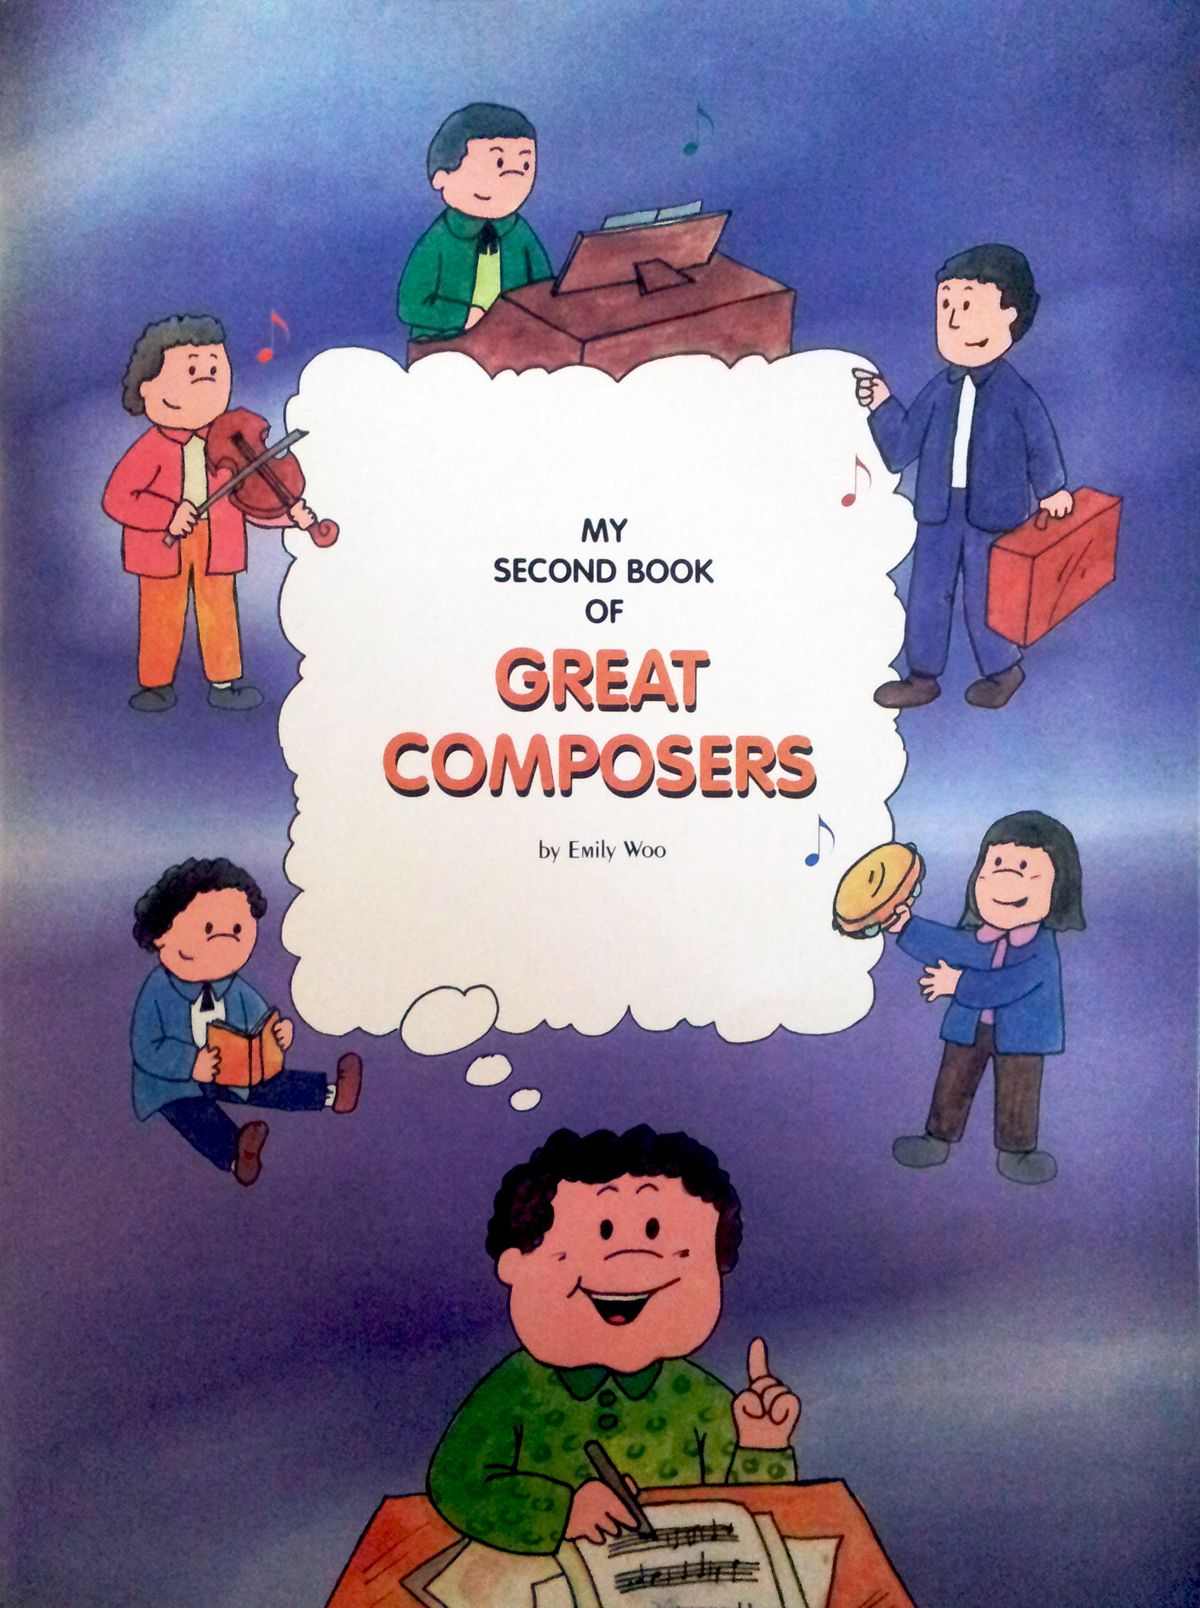 MY 2ND BOOK OF GREAT COMPOSERS